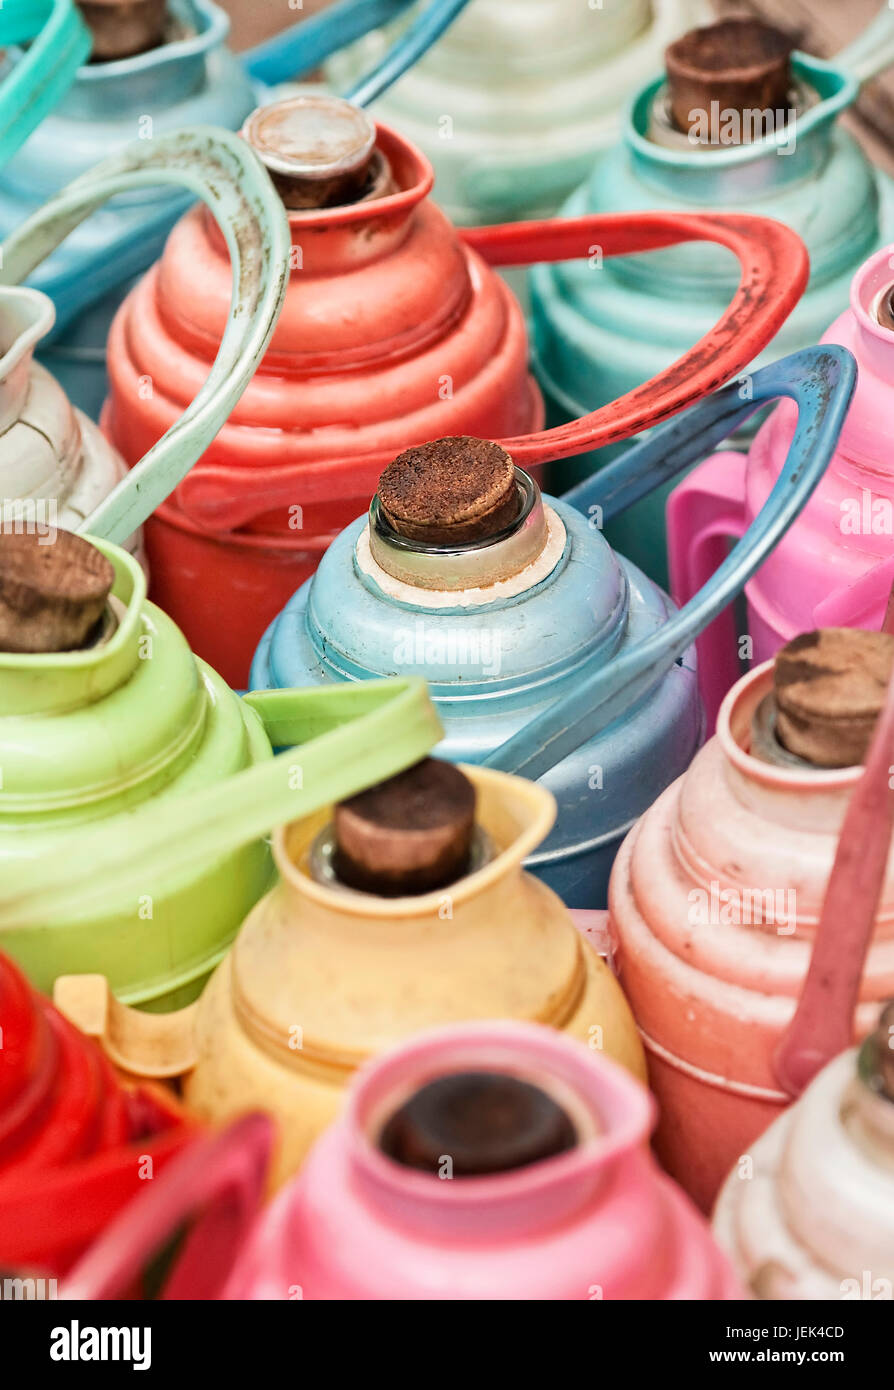 Arrangement of multicolored Chinese thermos jugs Stock Photo - Alamy